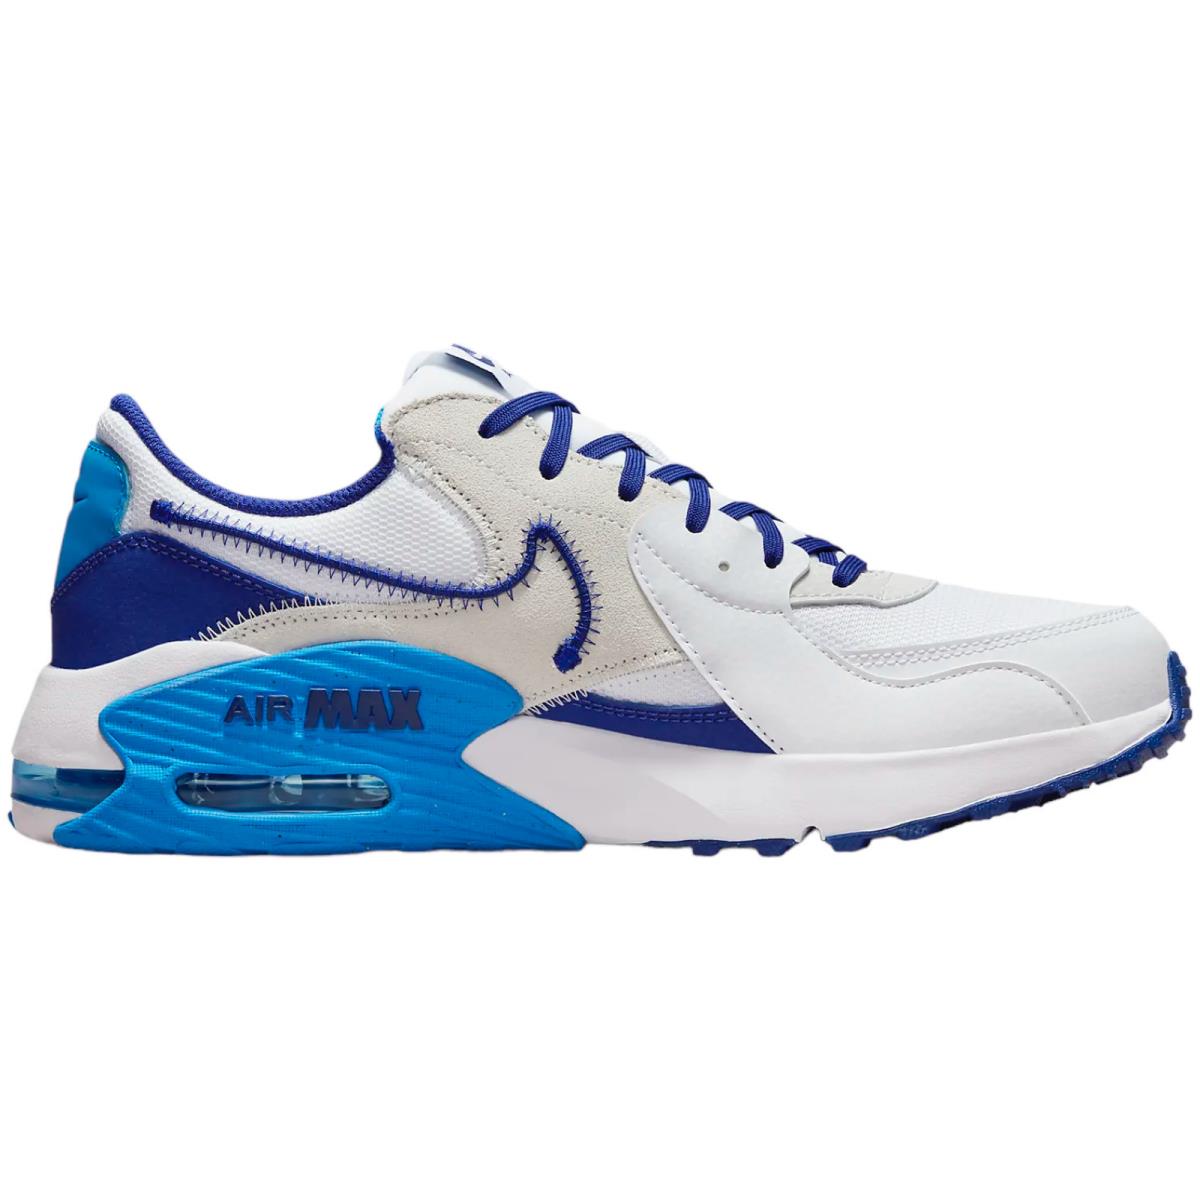 Nike Air Max Excee Men`s Casual Shoes All Colors US Sizes 7-14 White/Photo Blue/Photon Dust/Deep Royal Blue